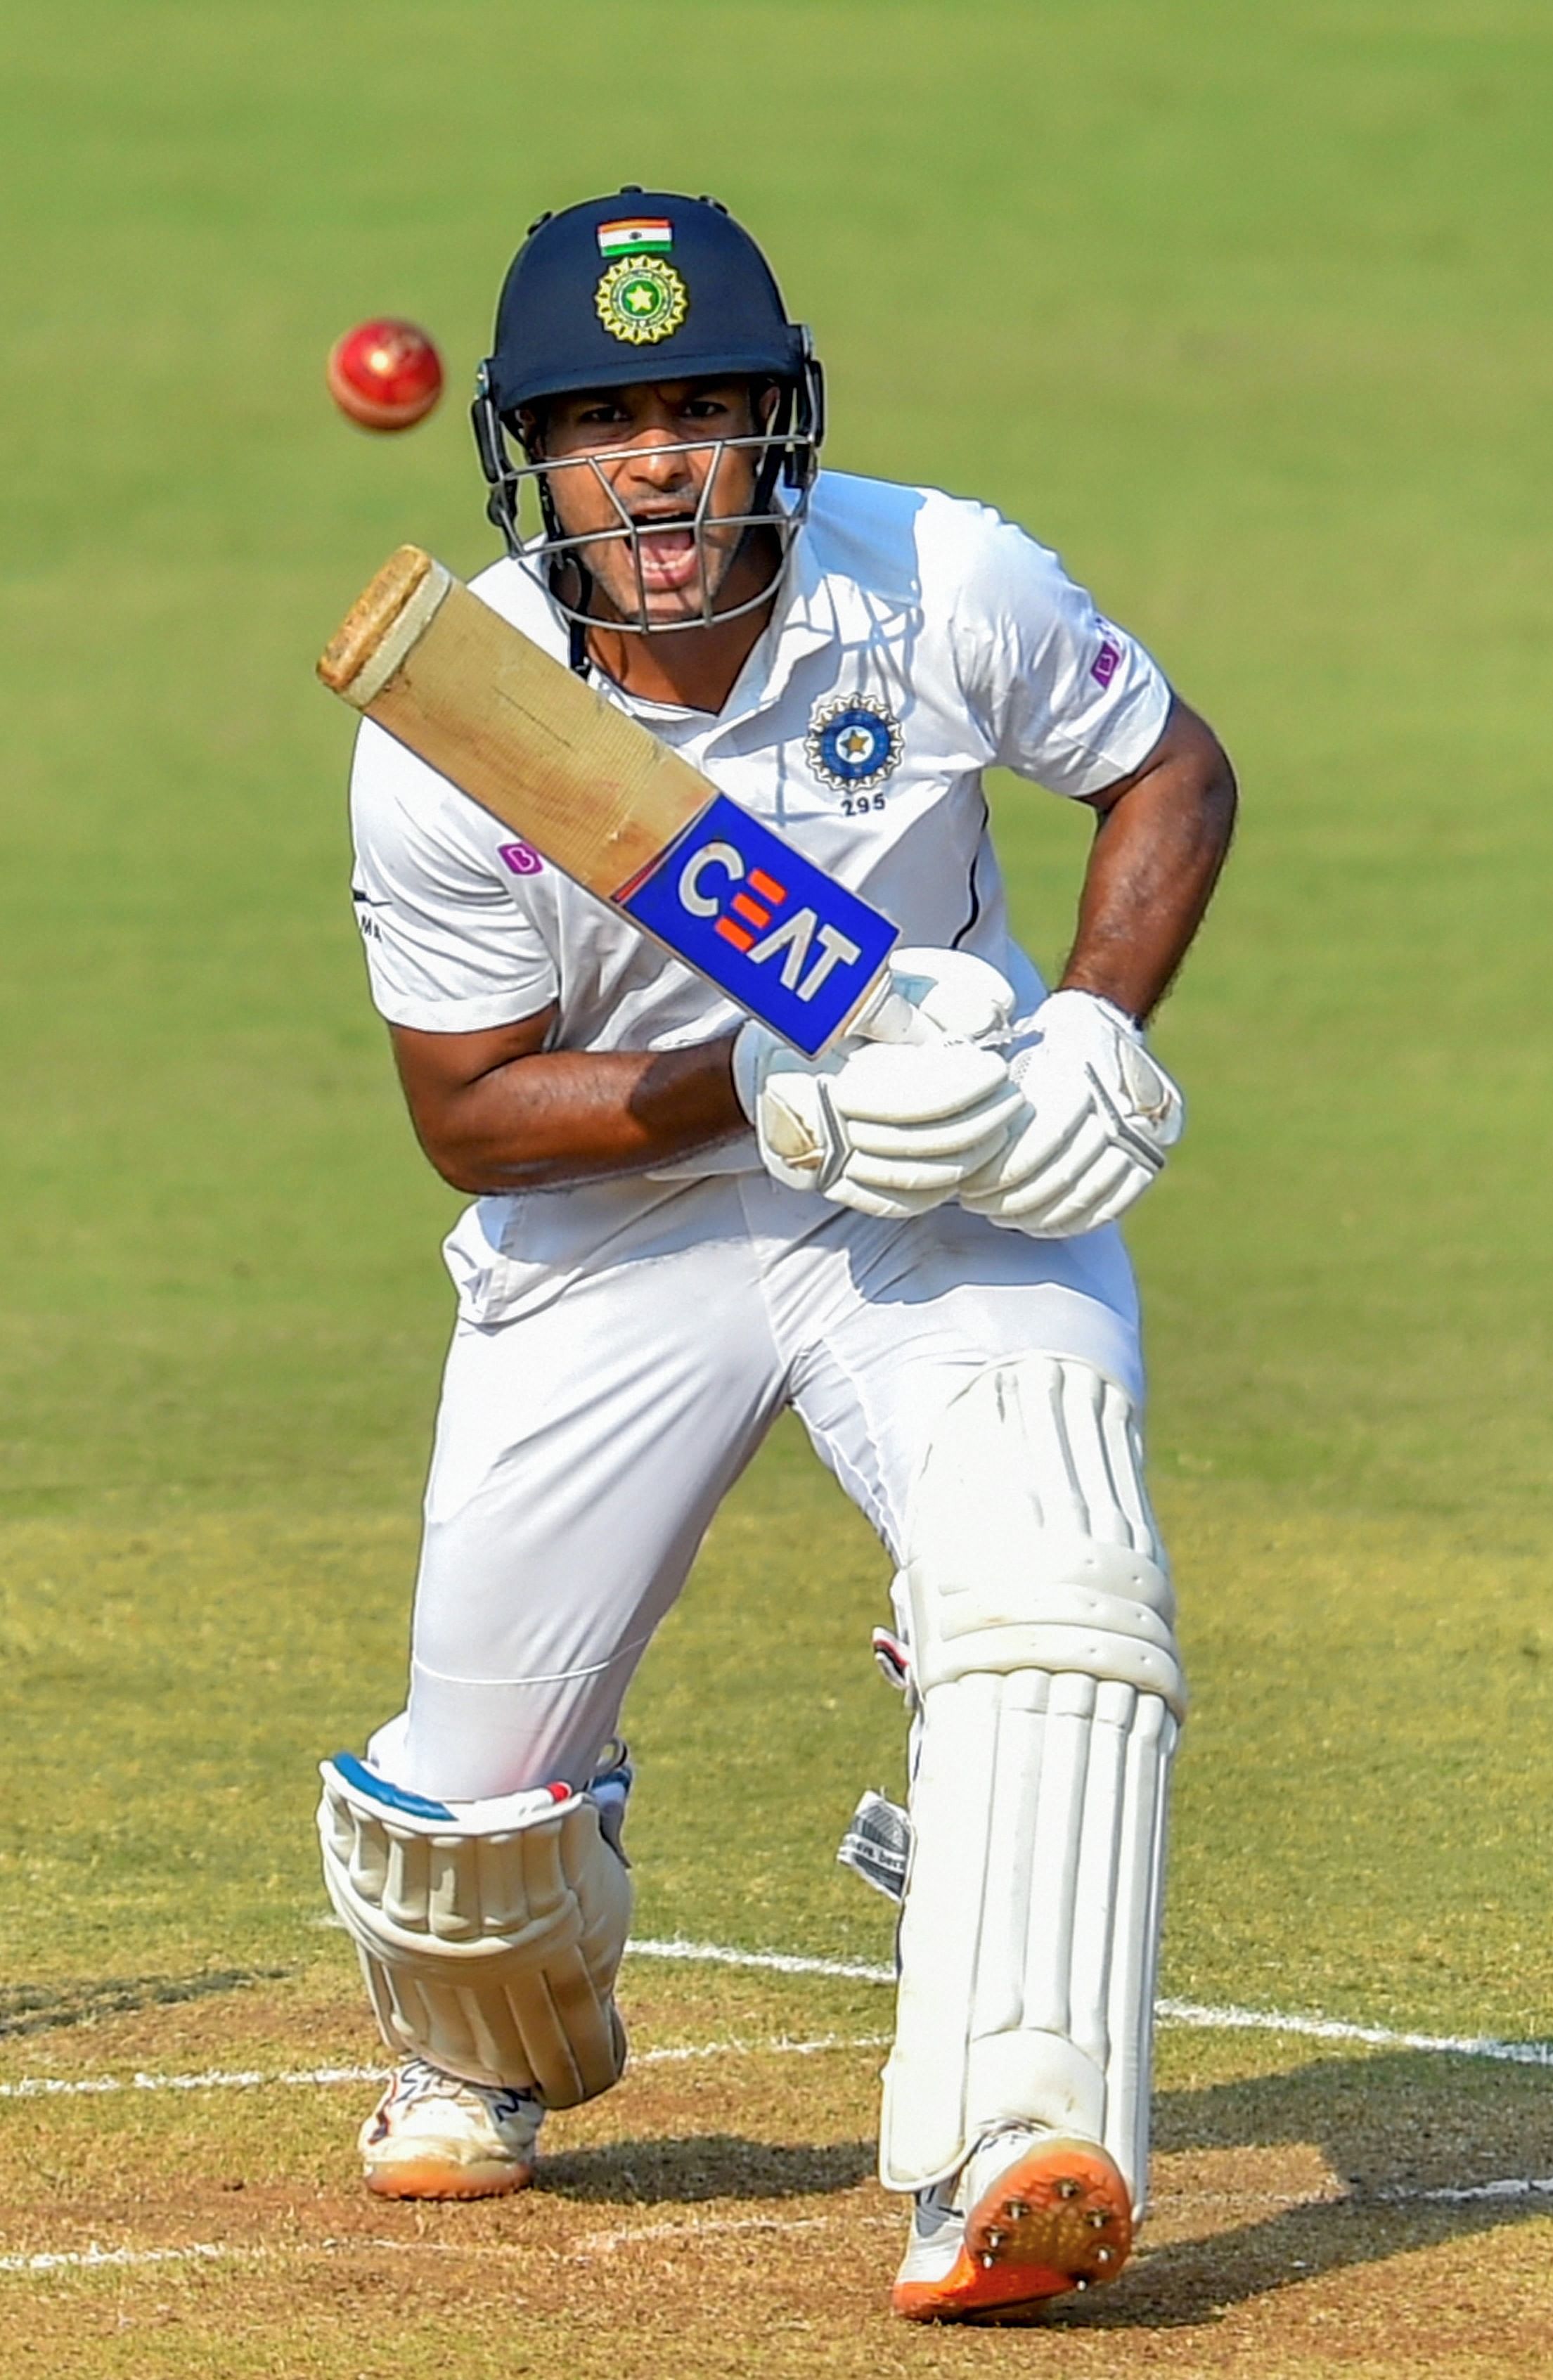 Indian batsman Mayank Agarwal plays a shot on the second day of the first cricket test match against Bangladesh, in Indore, Friday, Nov. 15, 2019. (Credit: PTI Photo)